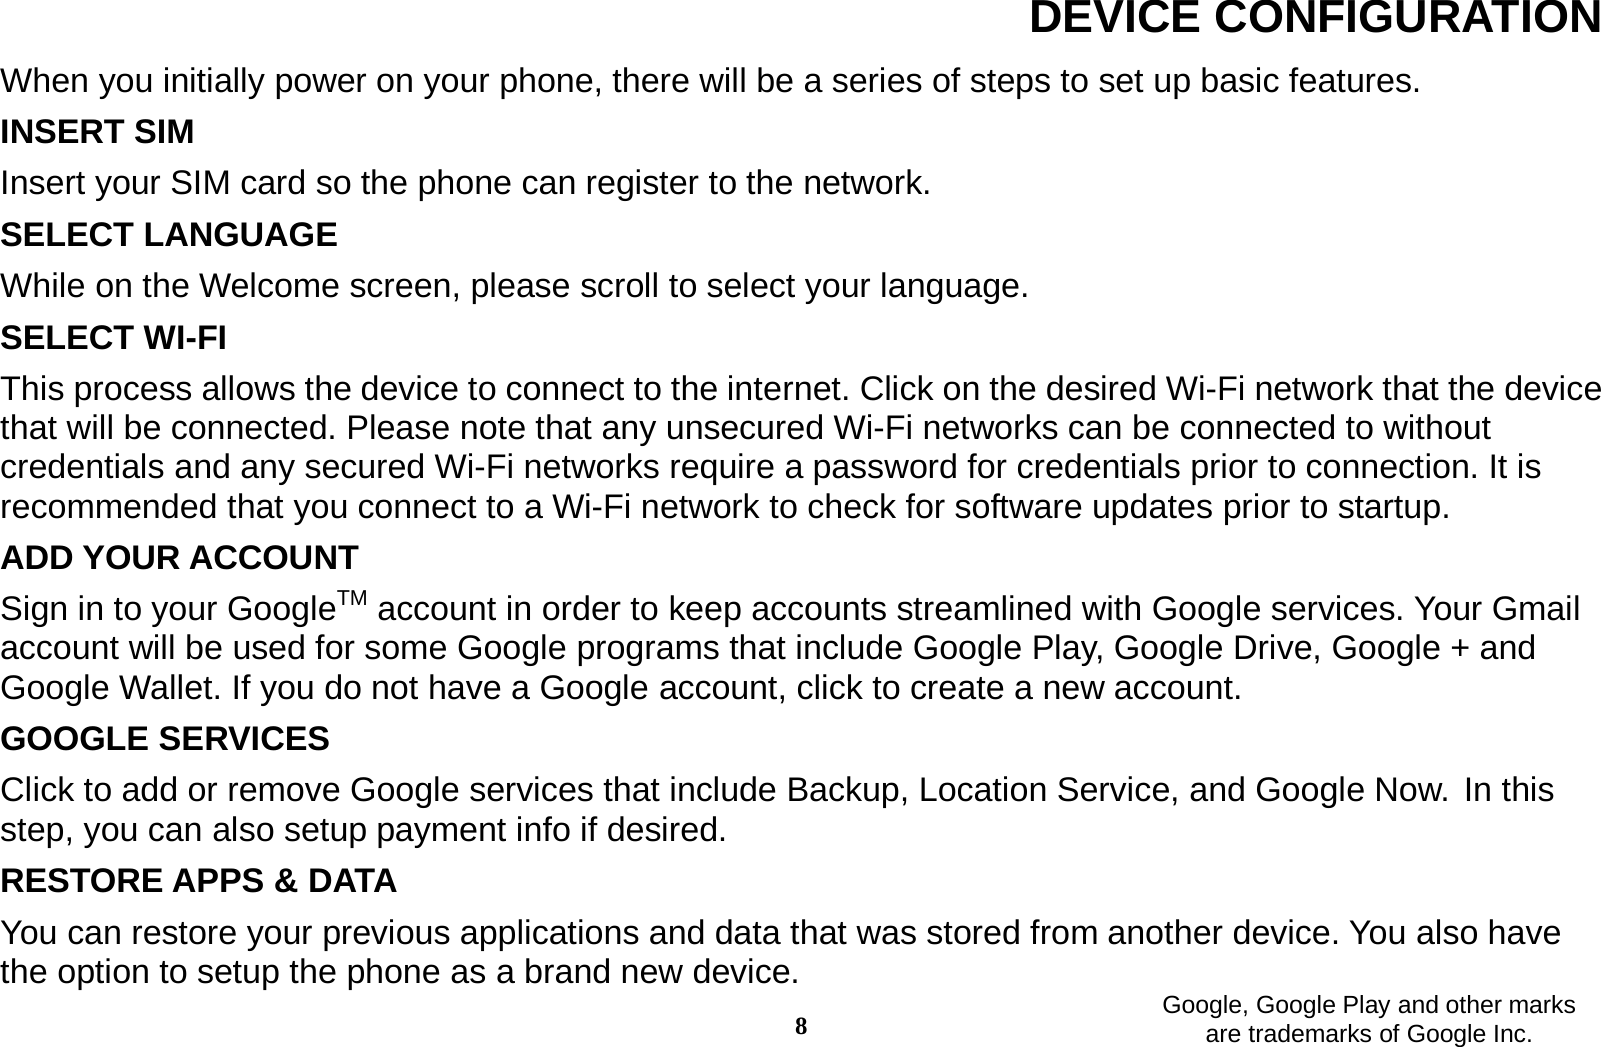 8 DEVICE CONFIGURATION When you initially power on your phone, there will be a series of steps to set up basic features. INSERT SIM   Insert your SIM card so the phone can register to the network.   SELECT LANGUAGE While on the Welcome screen, please scroll to select your language.   SELECT WI-FI   This process allows the device to connect to the internet. Click on the desired Wi-Fi network that the device that will be connected. Please note that any unsecured Wi-Fi networks can be connected to without credentials and any secured Wi-Fi networks require a password for credentials prior to connection. It is recommended that you connect to a Wi-Fi network to check for software updates prior to startup. ADD YOUR ACCOUNT Sign in to your GoogleTM account in order to keep accounts streamlined with Google services. Your Gmail account will be used for some Google programs that include Google Play, Google Drive, Google + and Google Wallet. If you do not have a Google account, click to create a new account.   GOOGLE SERVICES Click to add or remove Google services that include Backup, Location Service, and Google Now. In this step, you can also setup payment info if desired. RESTORE APPS &amp; DATA You can restore your previous applications and data that was stored from another device. You also have the option to setup the phone as a brand new device.    Google, Google Play and other marks are trademarks of Google Inc. 